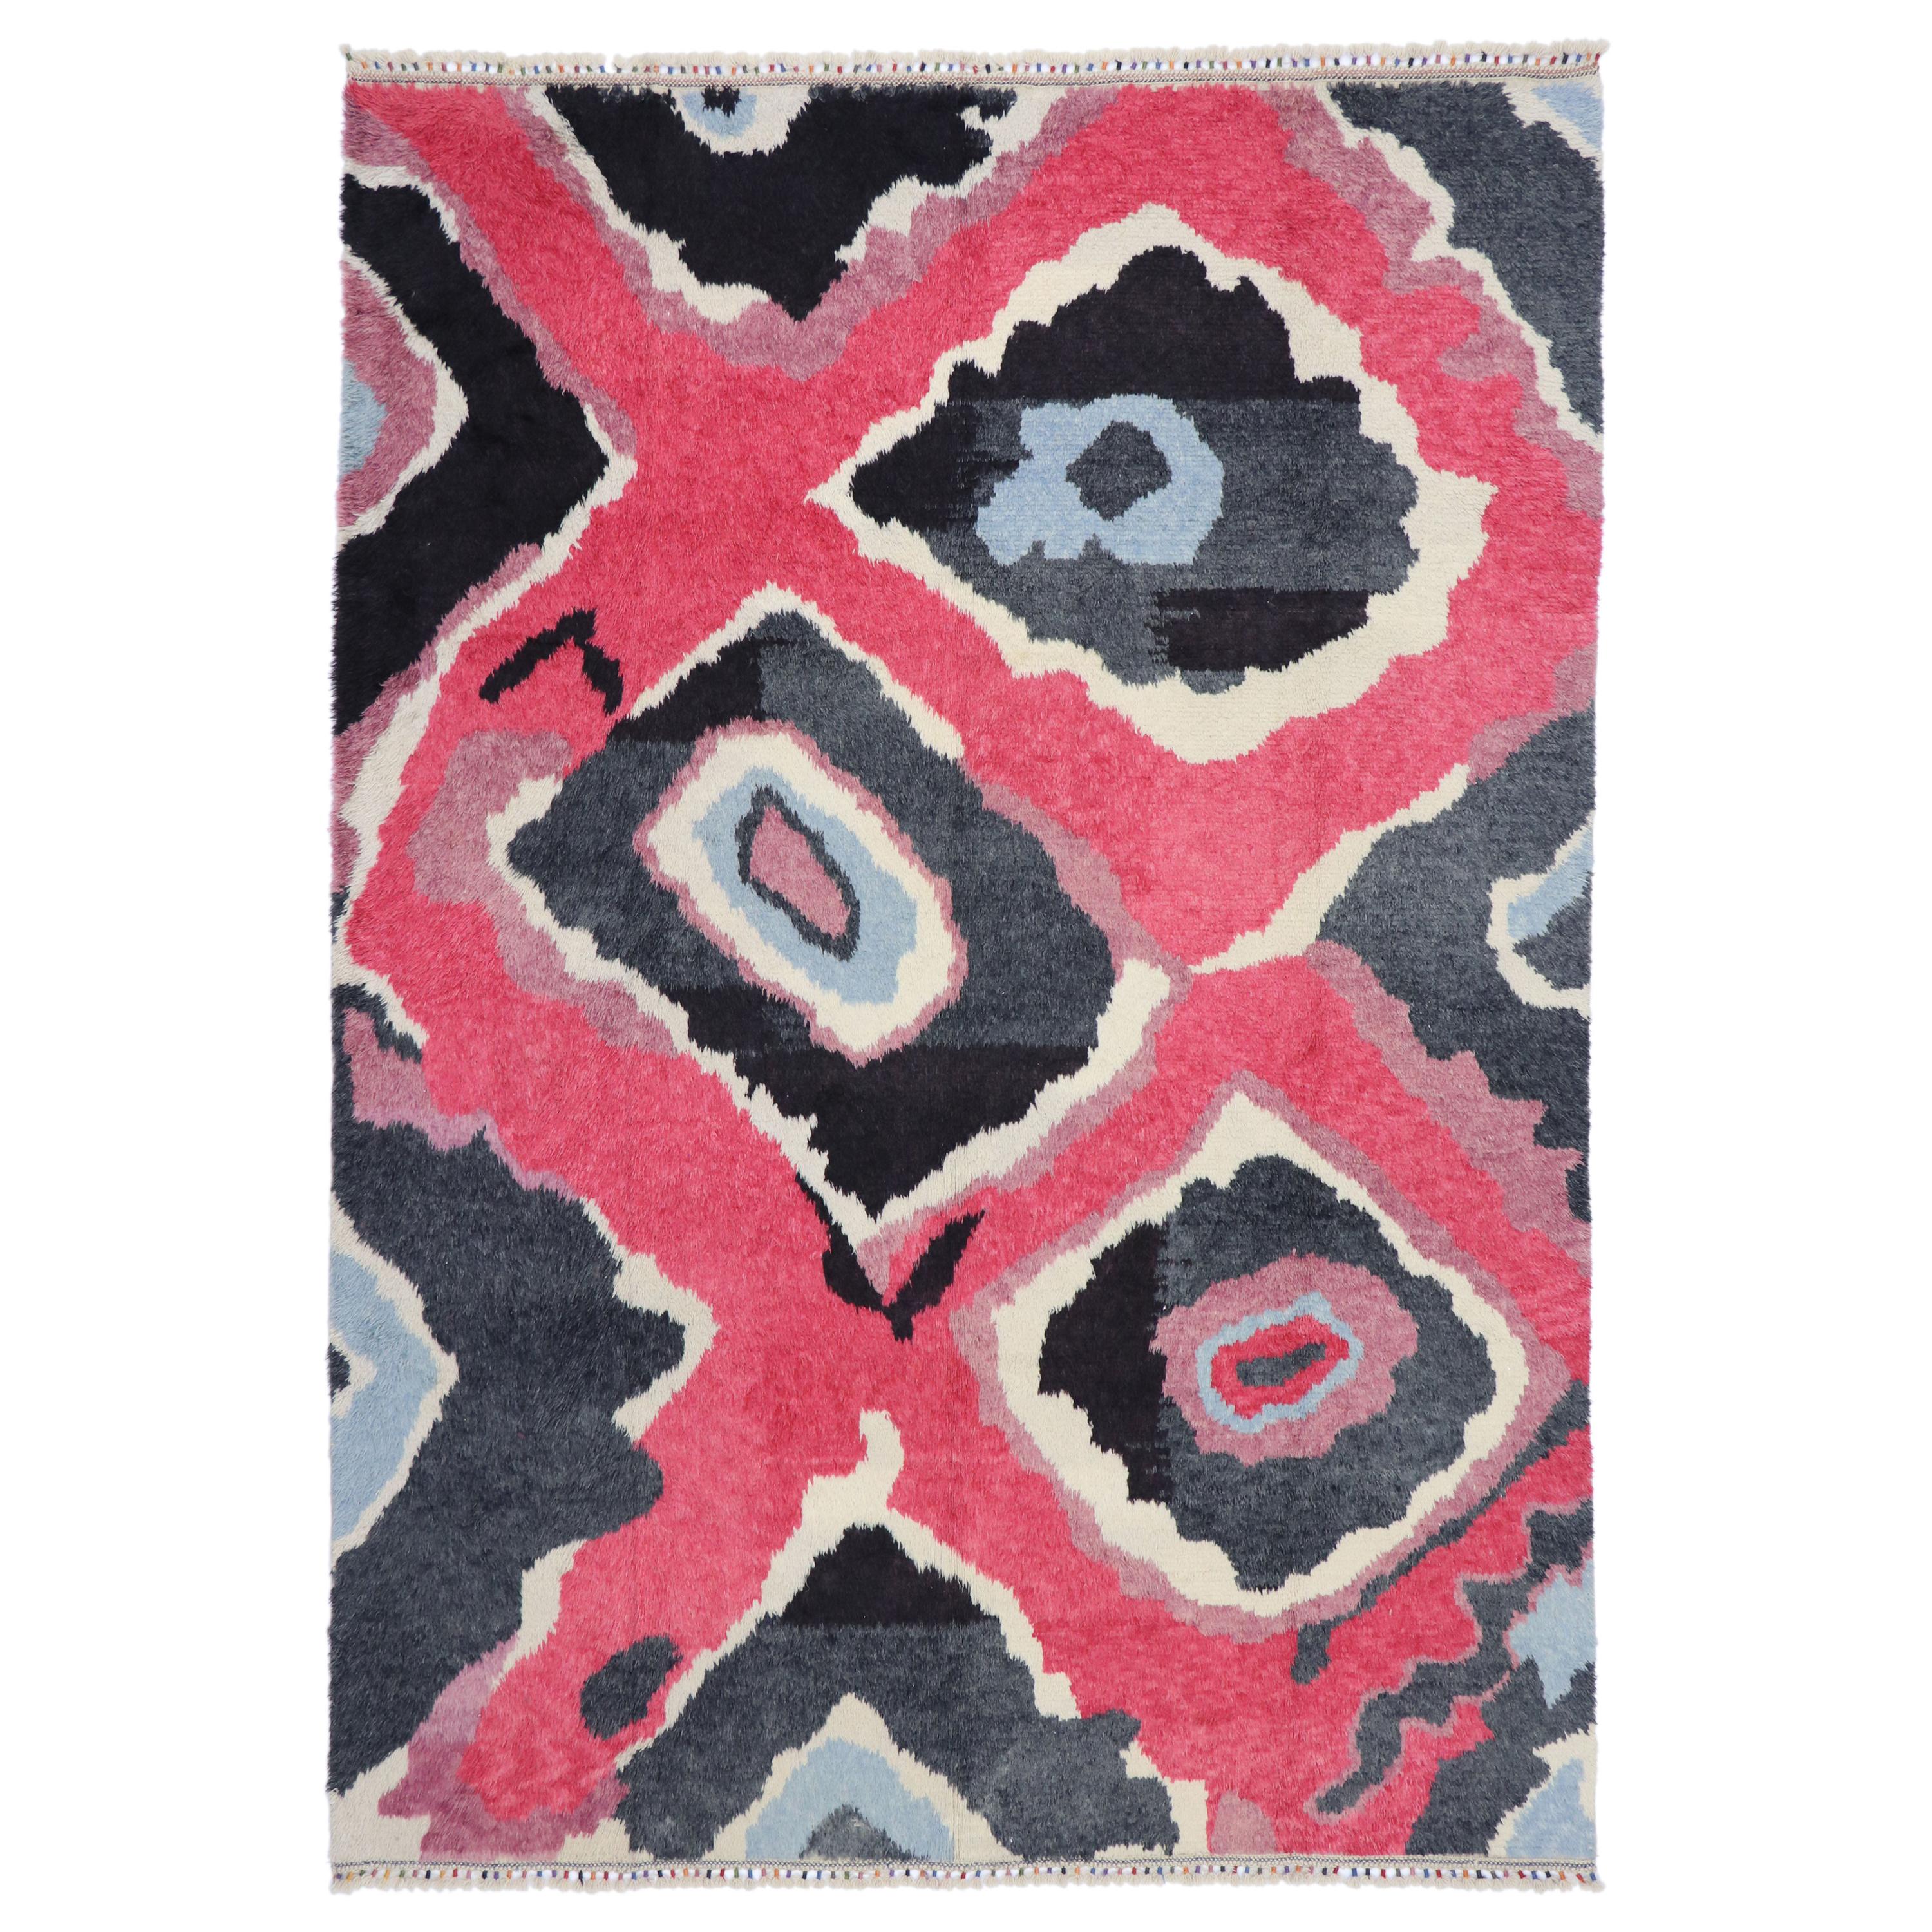 New Colorful Contemporary Tulu Shag Area Rug Inspired by Sonia Delaunay For Sale